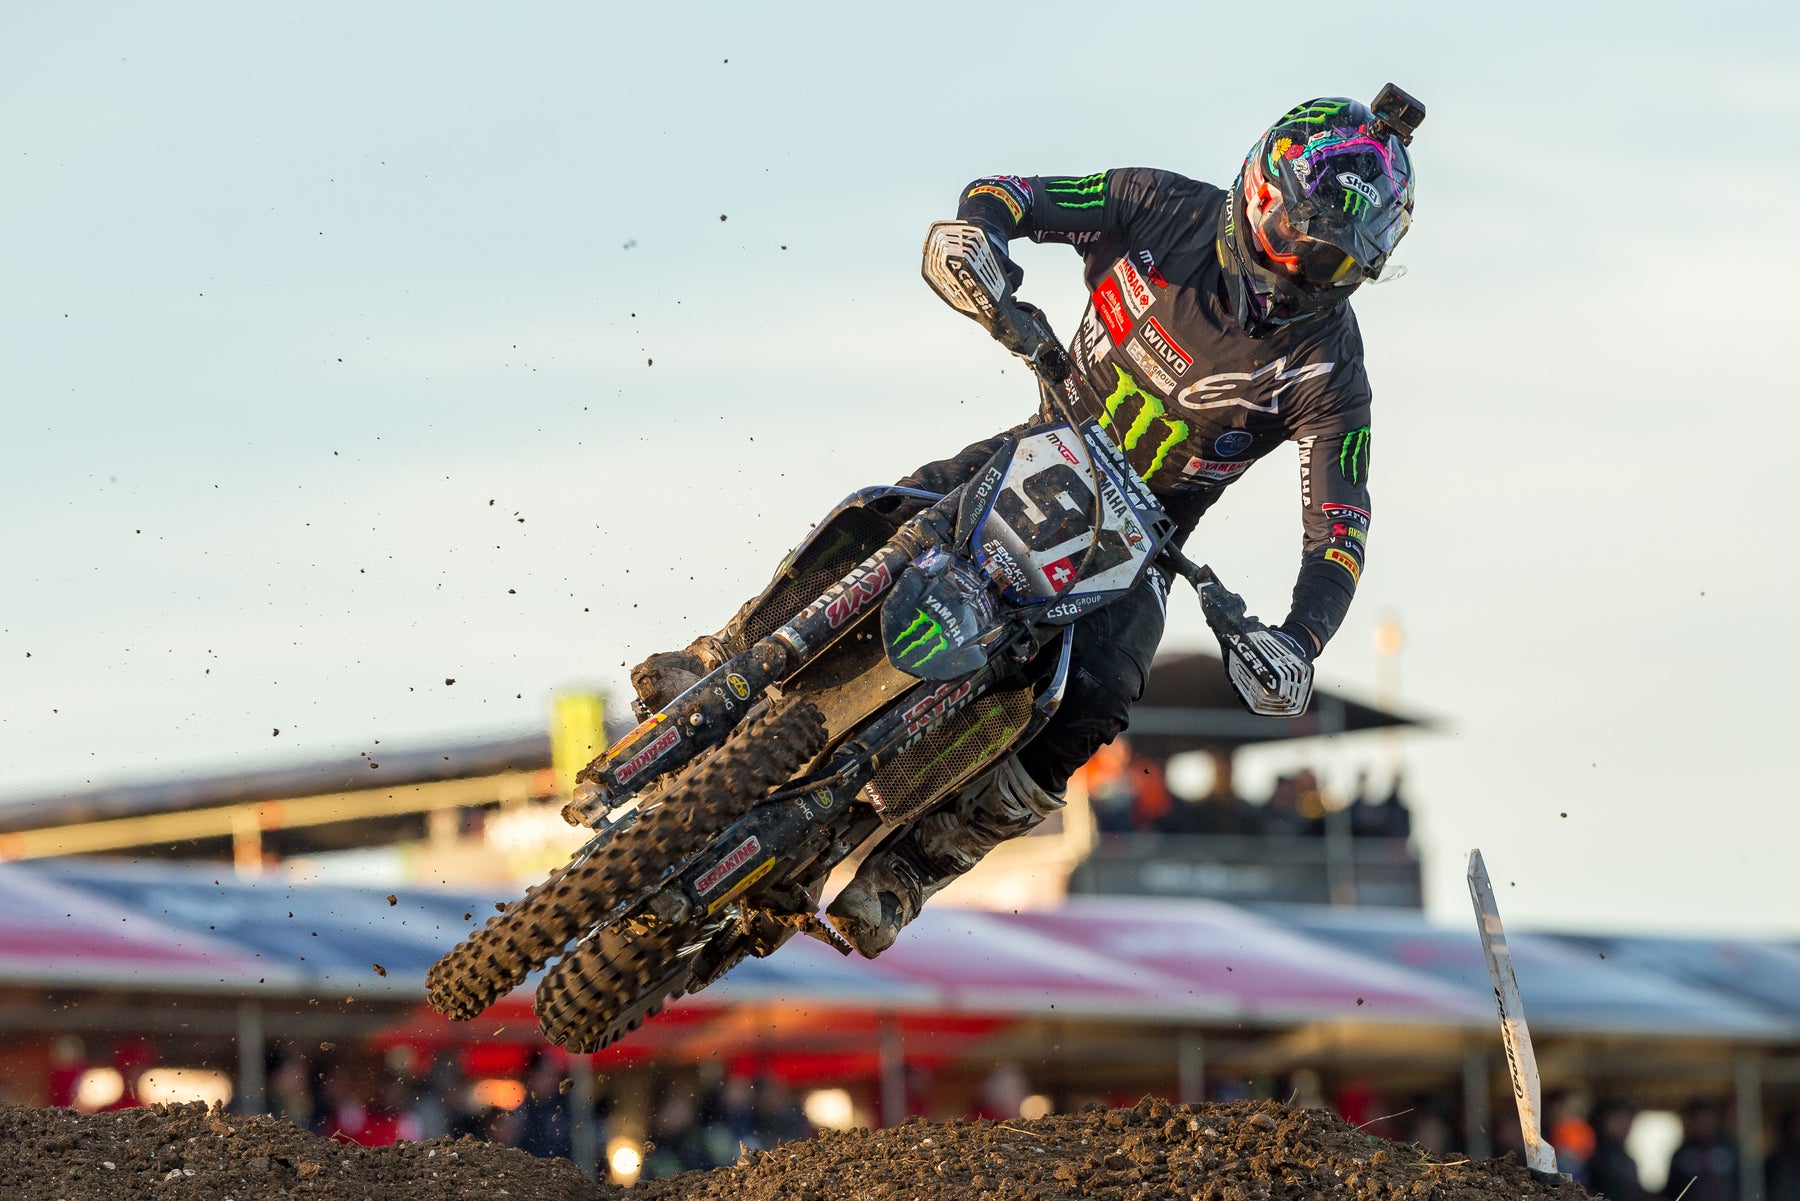 JEREMY SEEWER AND MAXIME RENAUX SHINE IN MXGP SEASON OPENER AT MATTERLEY BASIN, ENGLAND